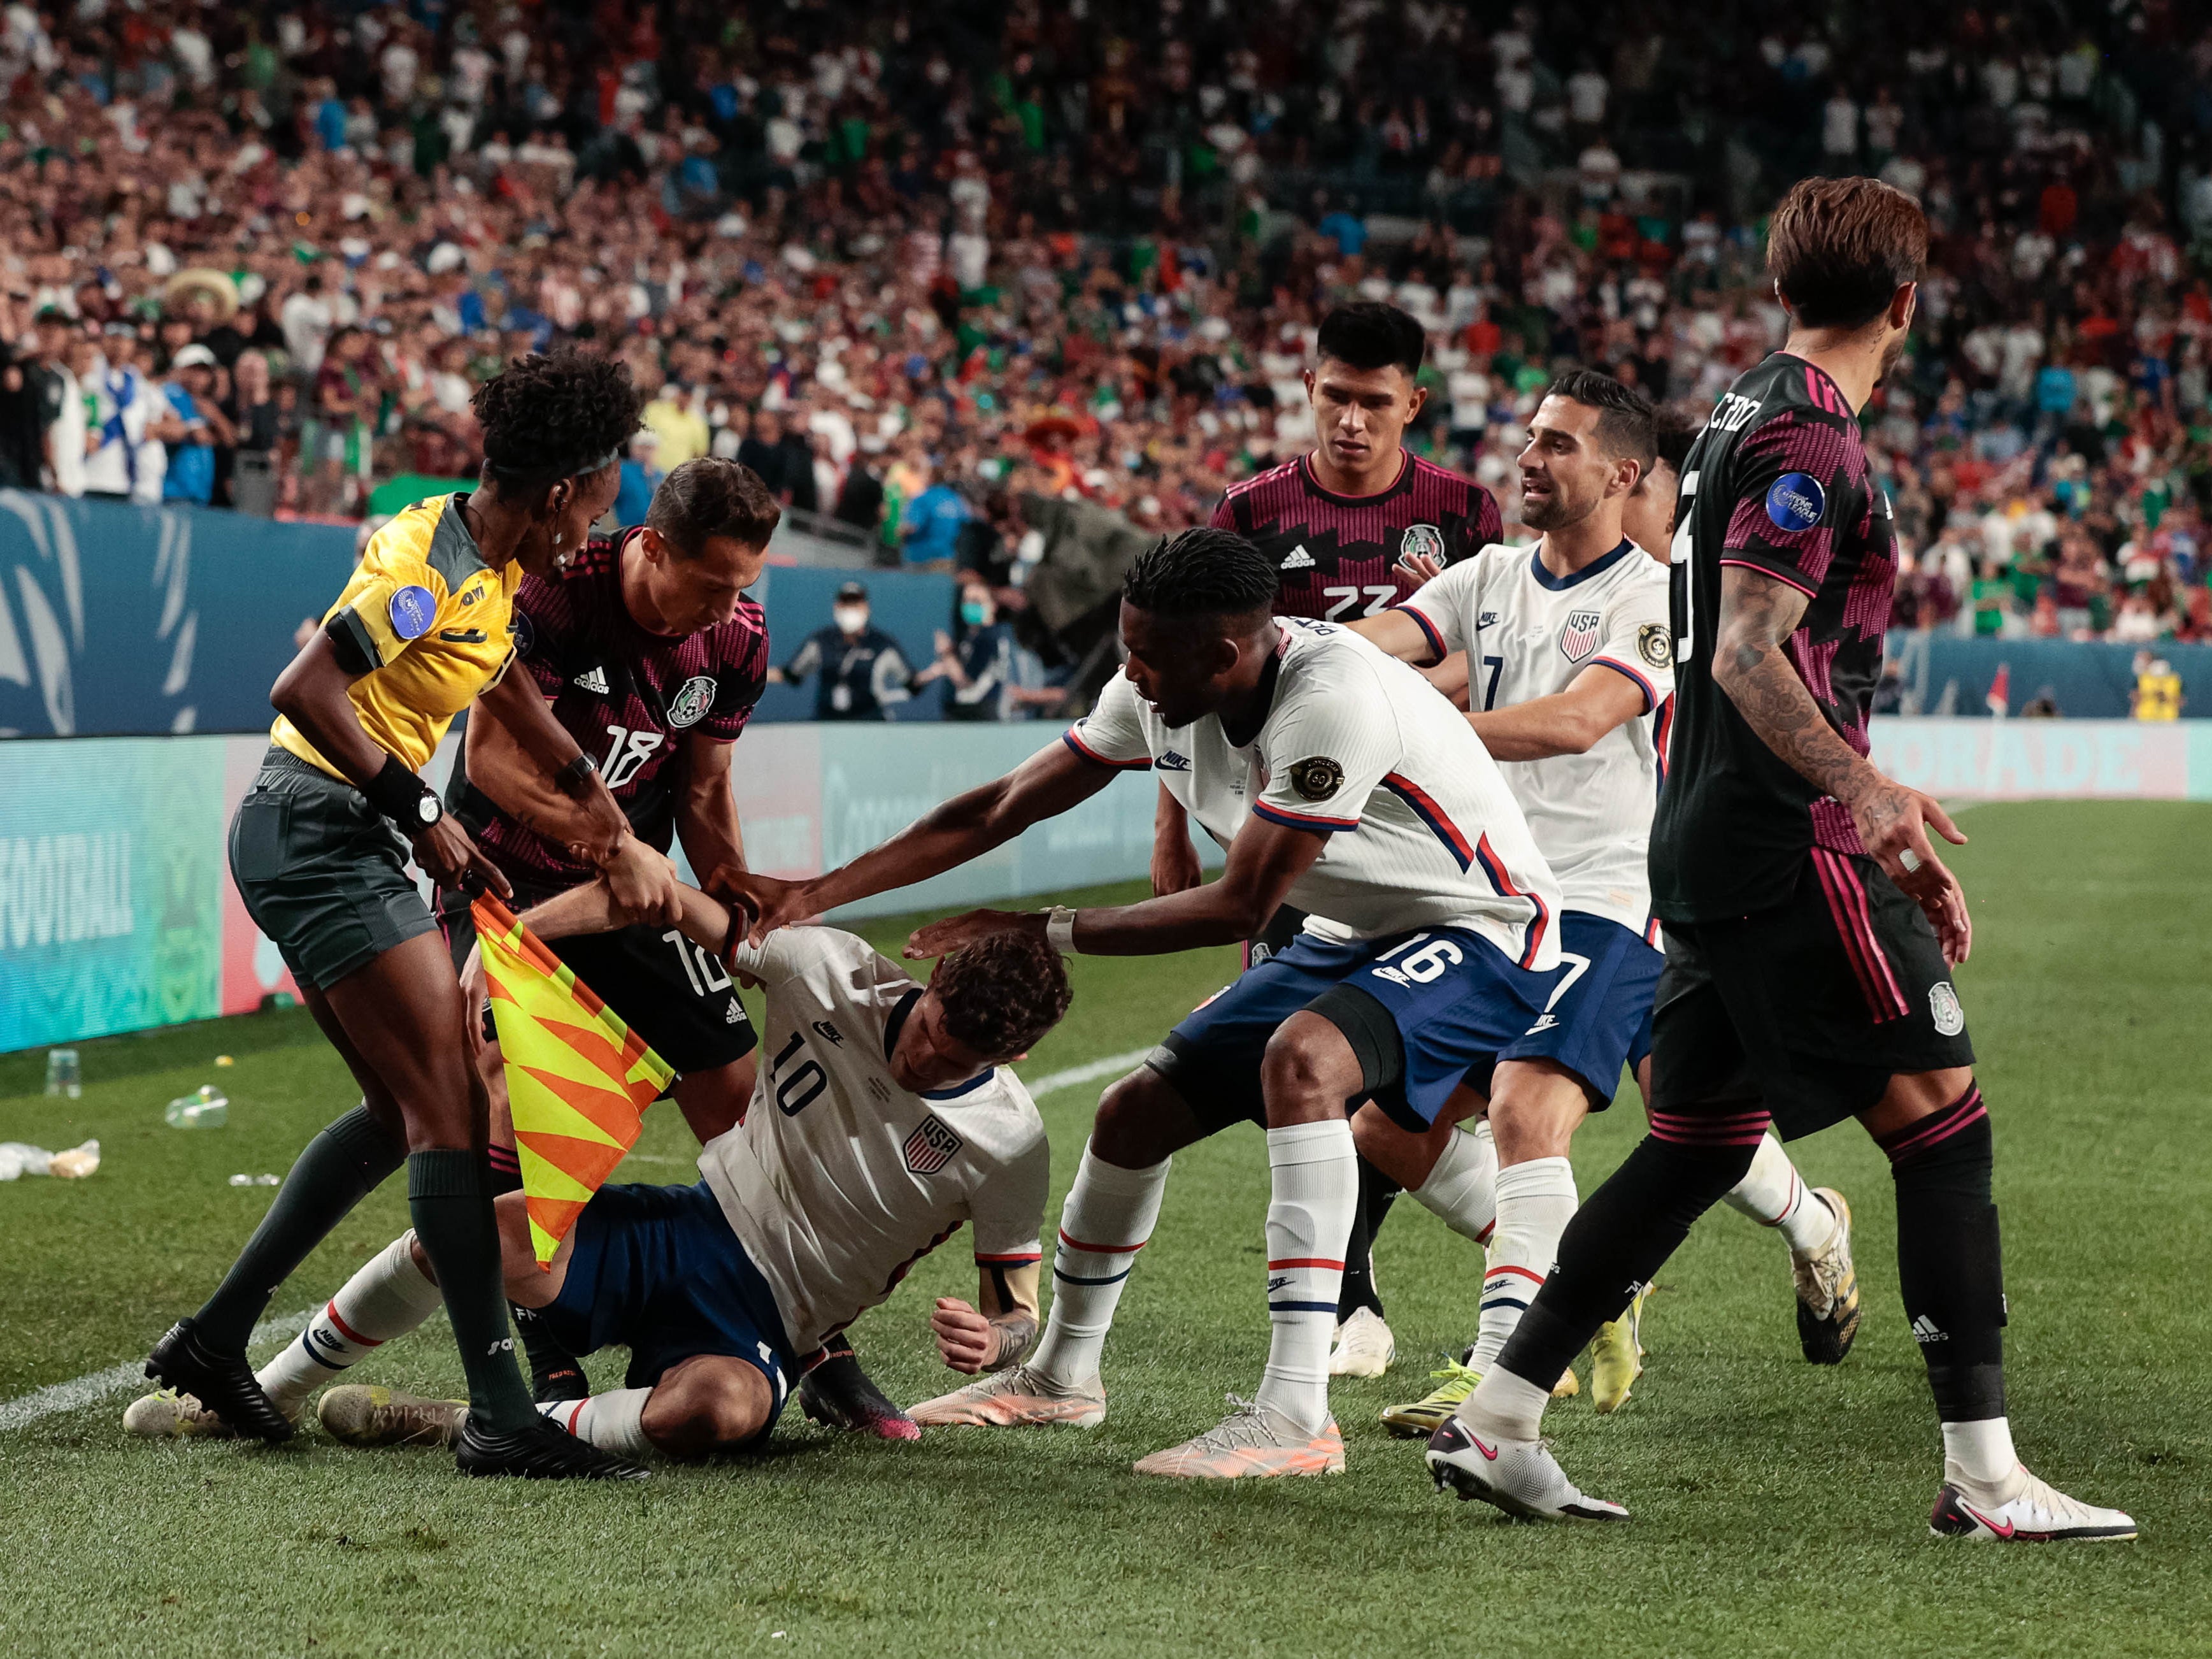 Assistant referee Jassett Kerr intervenes in extra time during the 2021 CONCACAF Nations League Finals soccer series final match at Empower Field at Mile High.